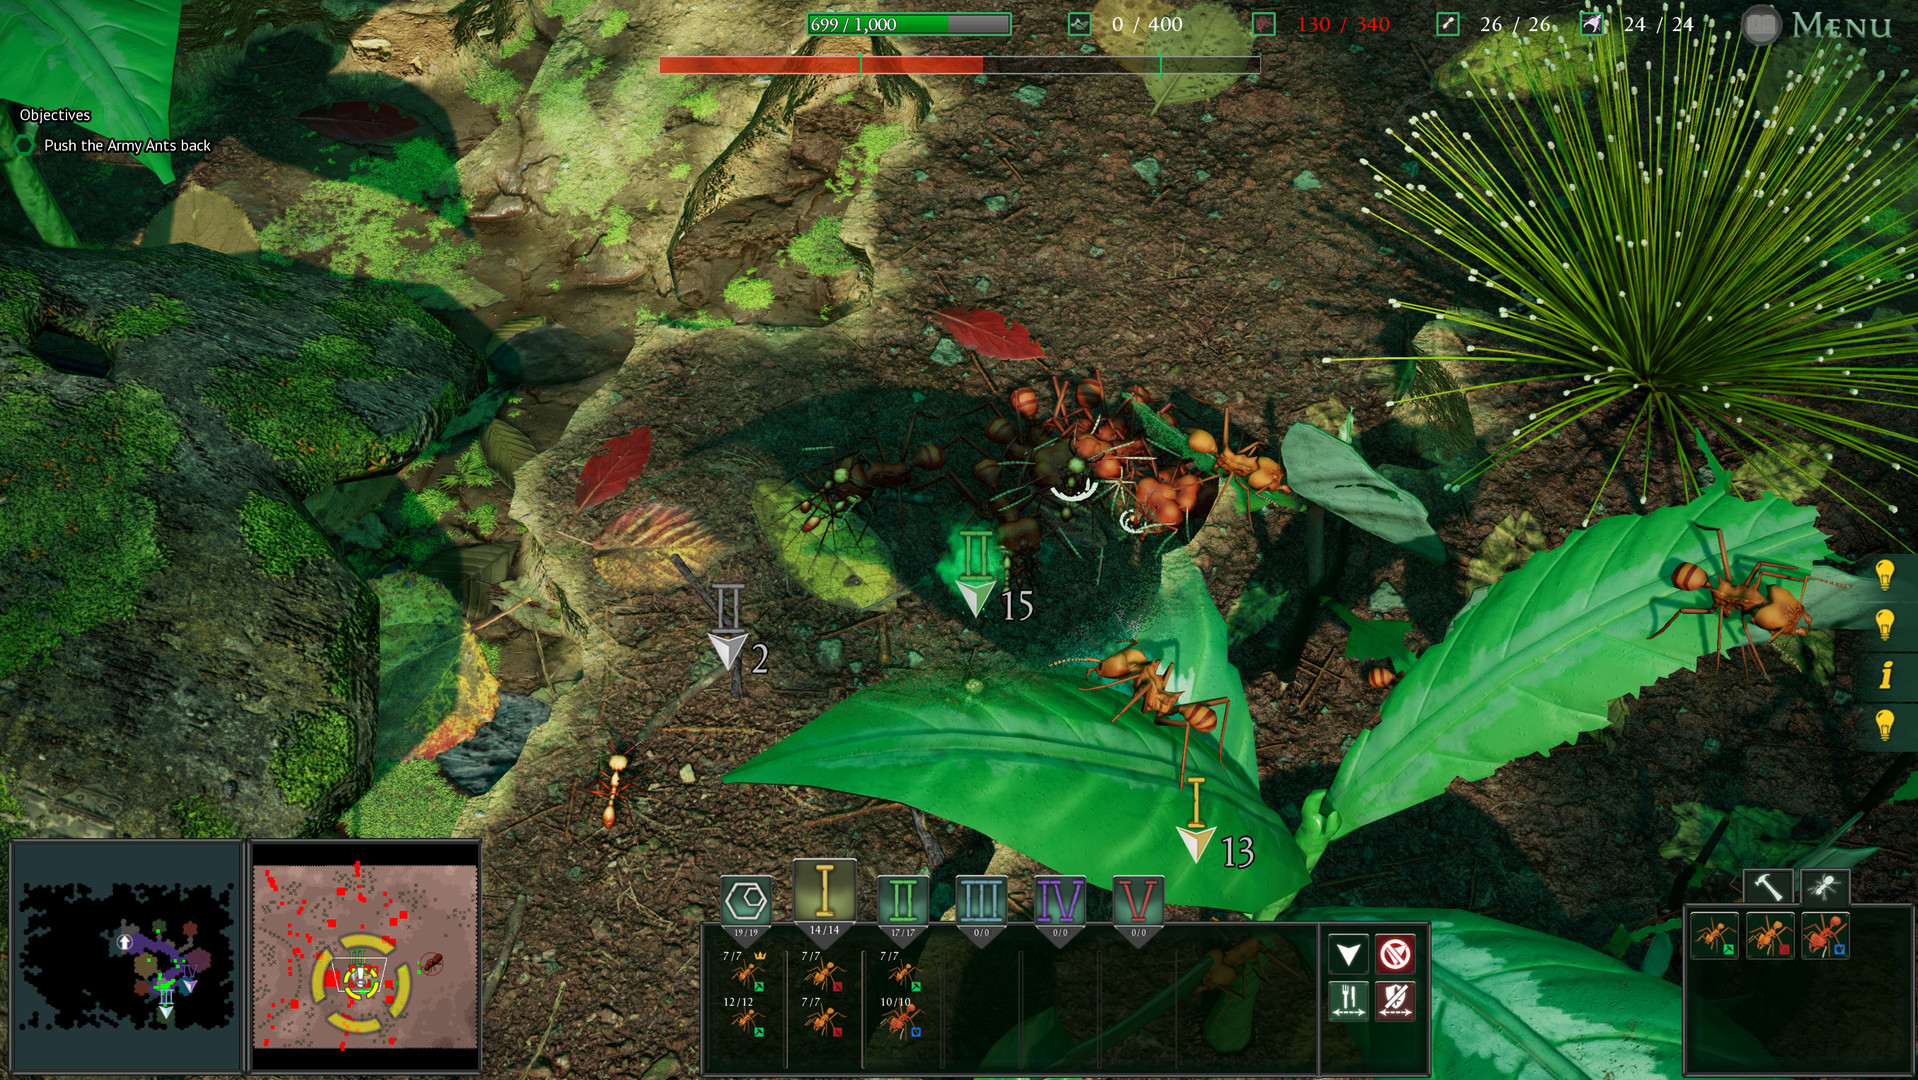 empires of the undergrowth all bugs